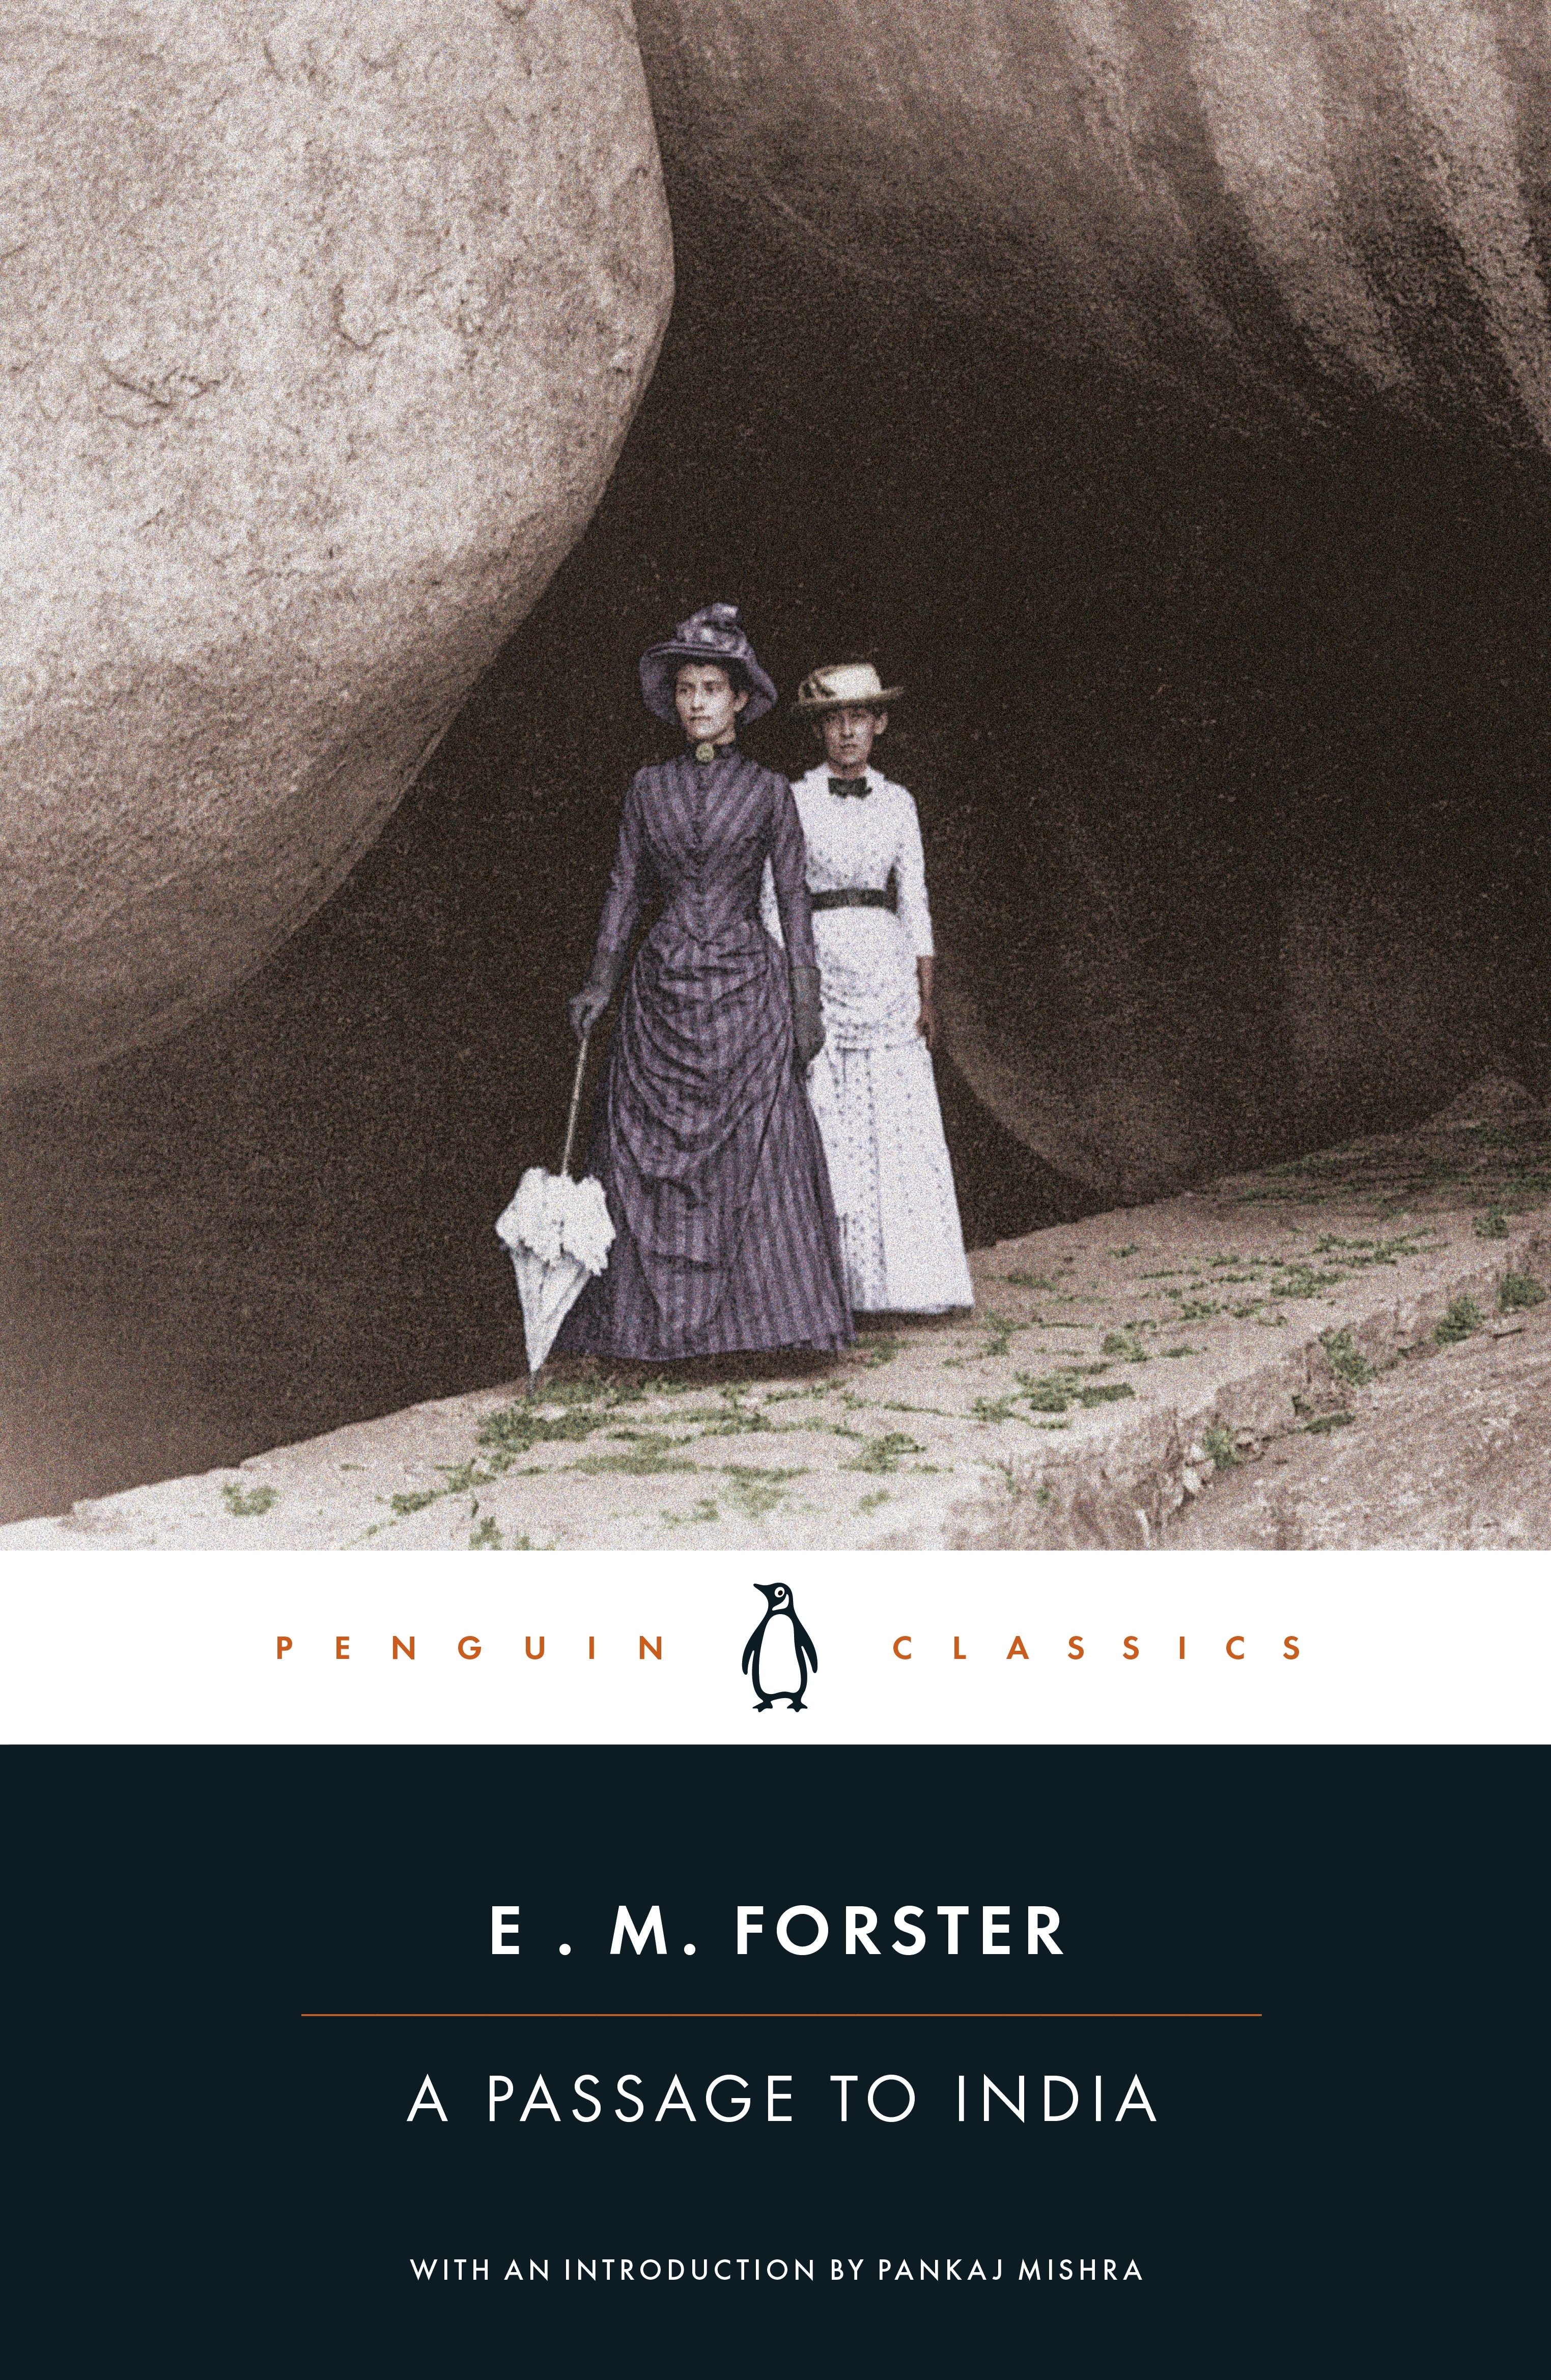 Book “A Passage to India” by E M Forster, Pankaj Mishra — July 28, 2005